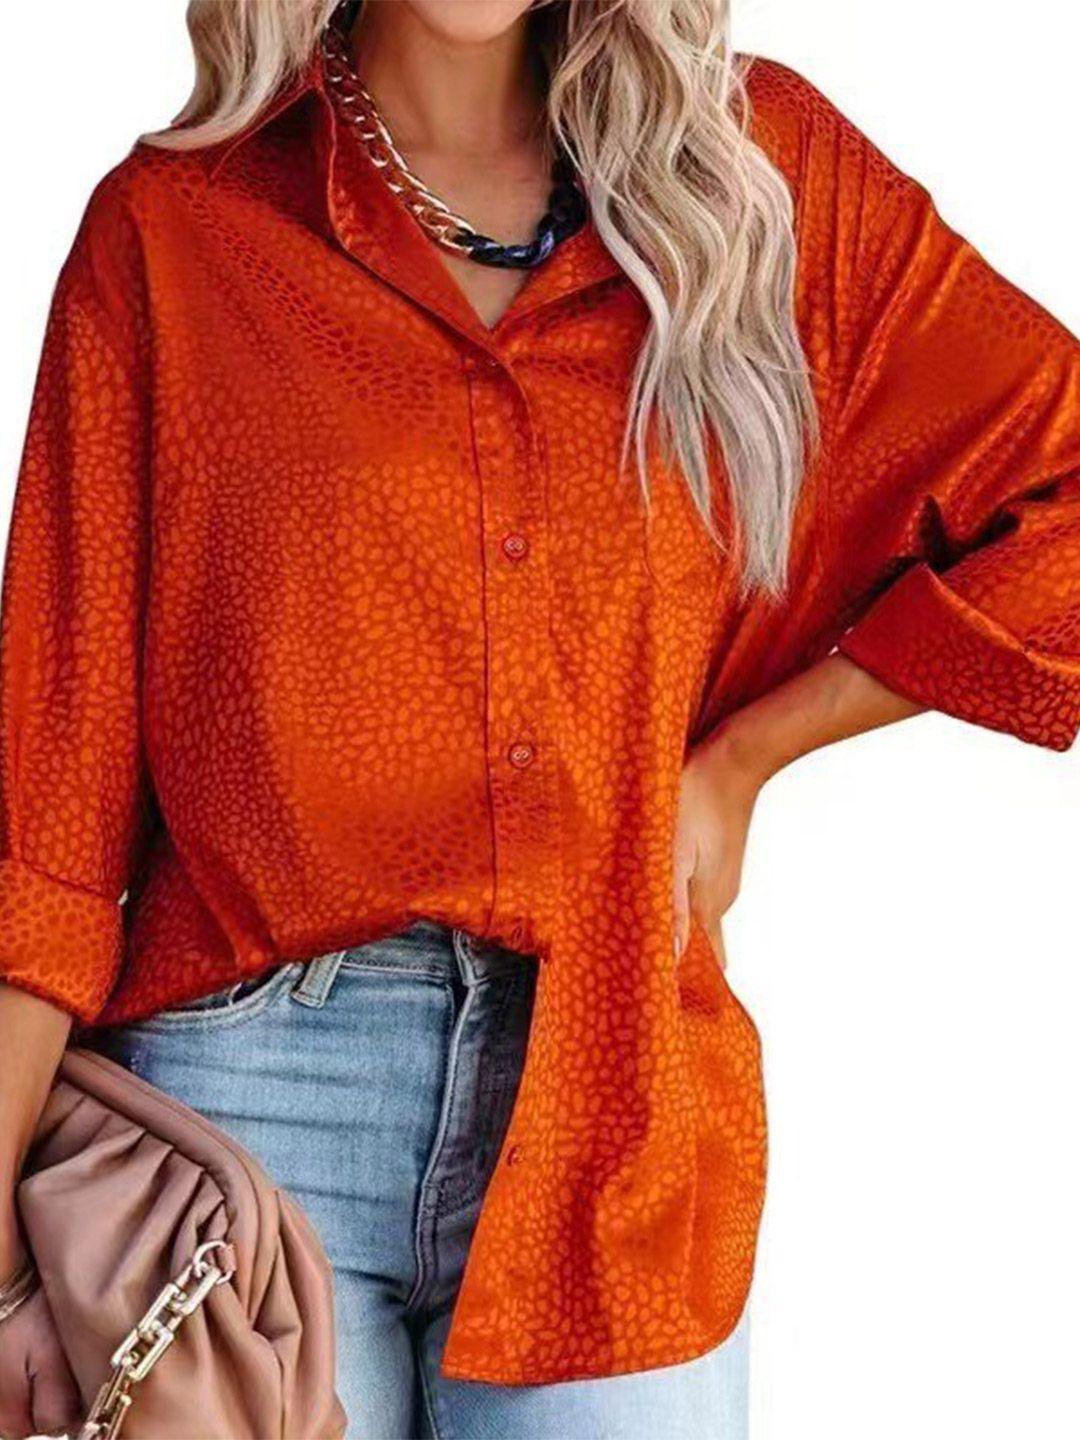 stylecast orange abstract printed spread collar casual shirt